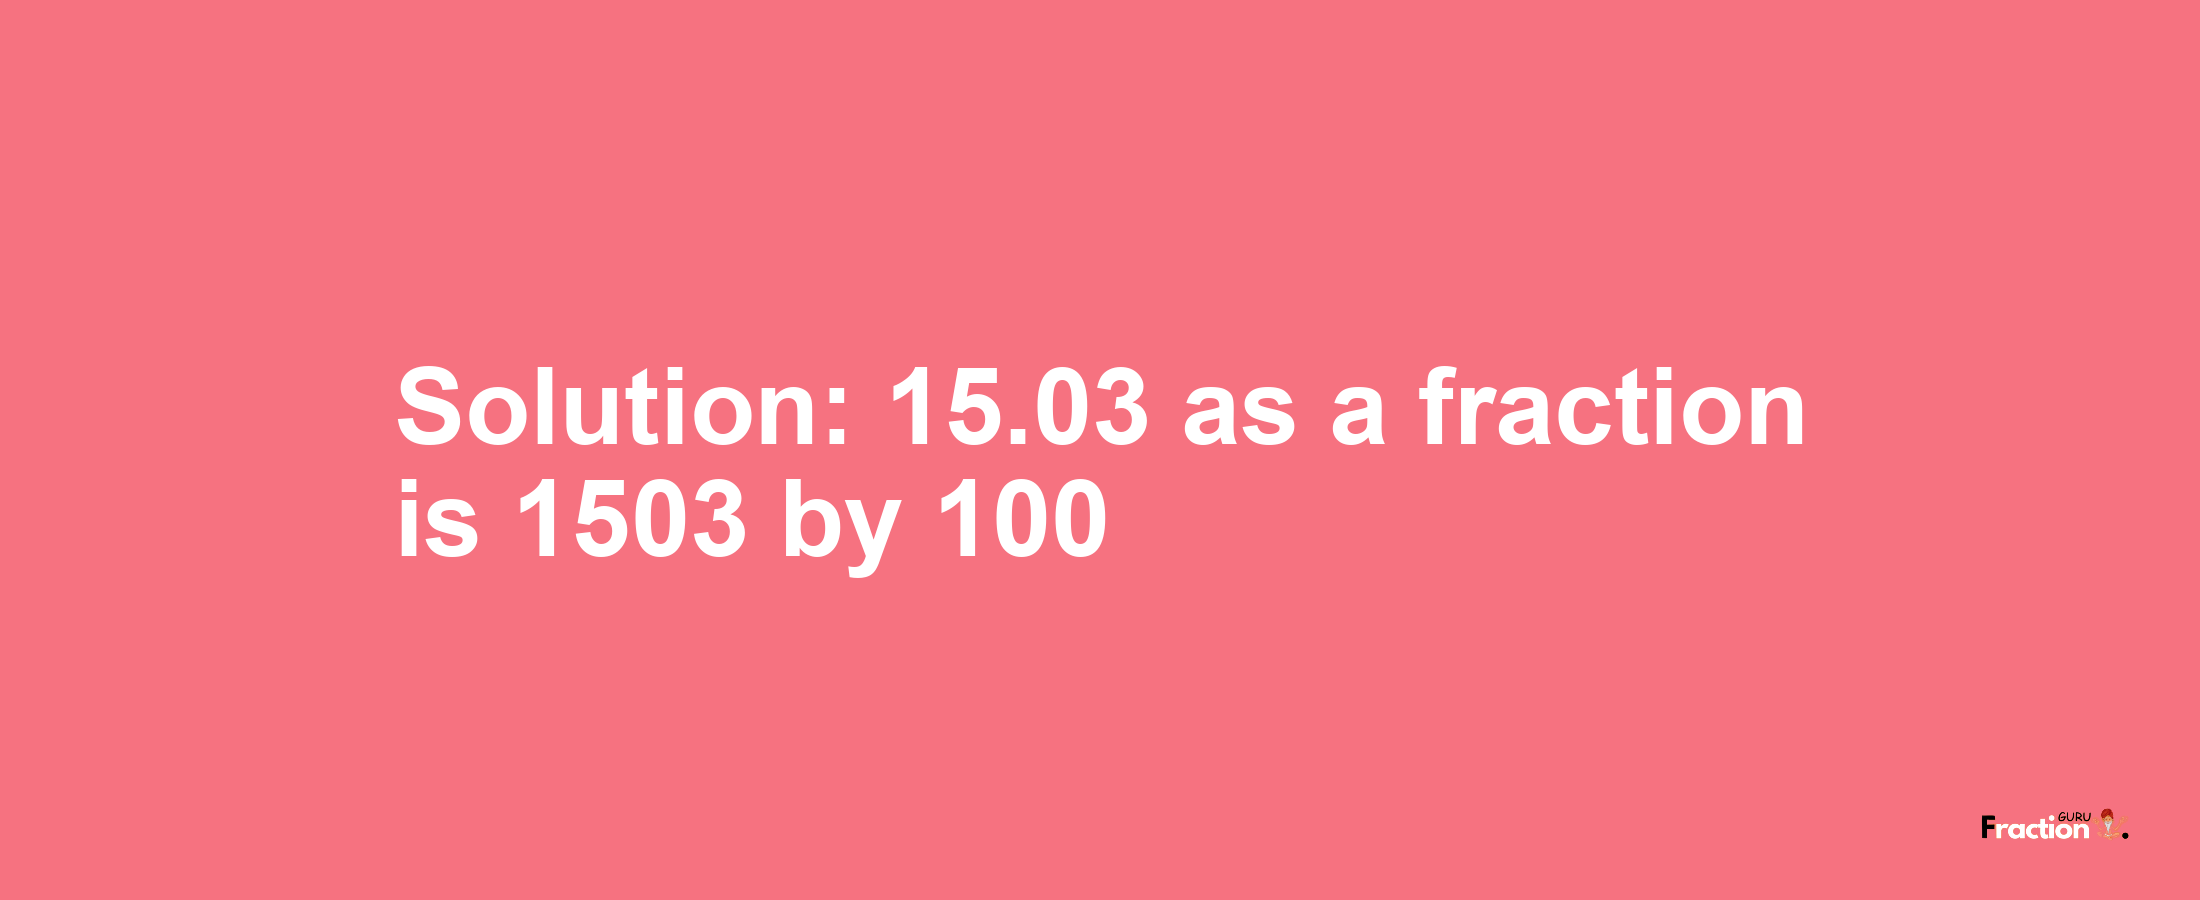 Solution:15.03 as a fraction is 1503/100